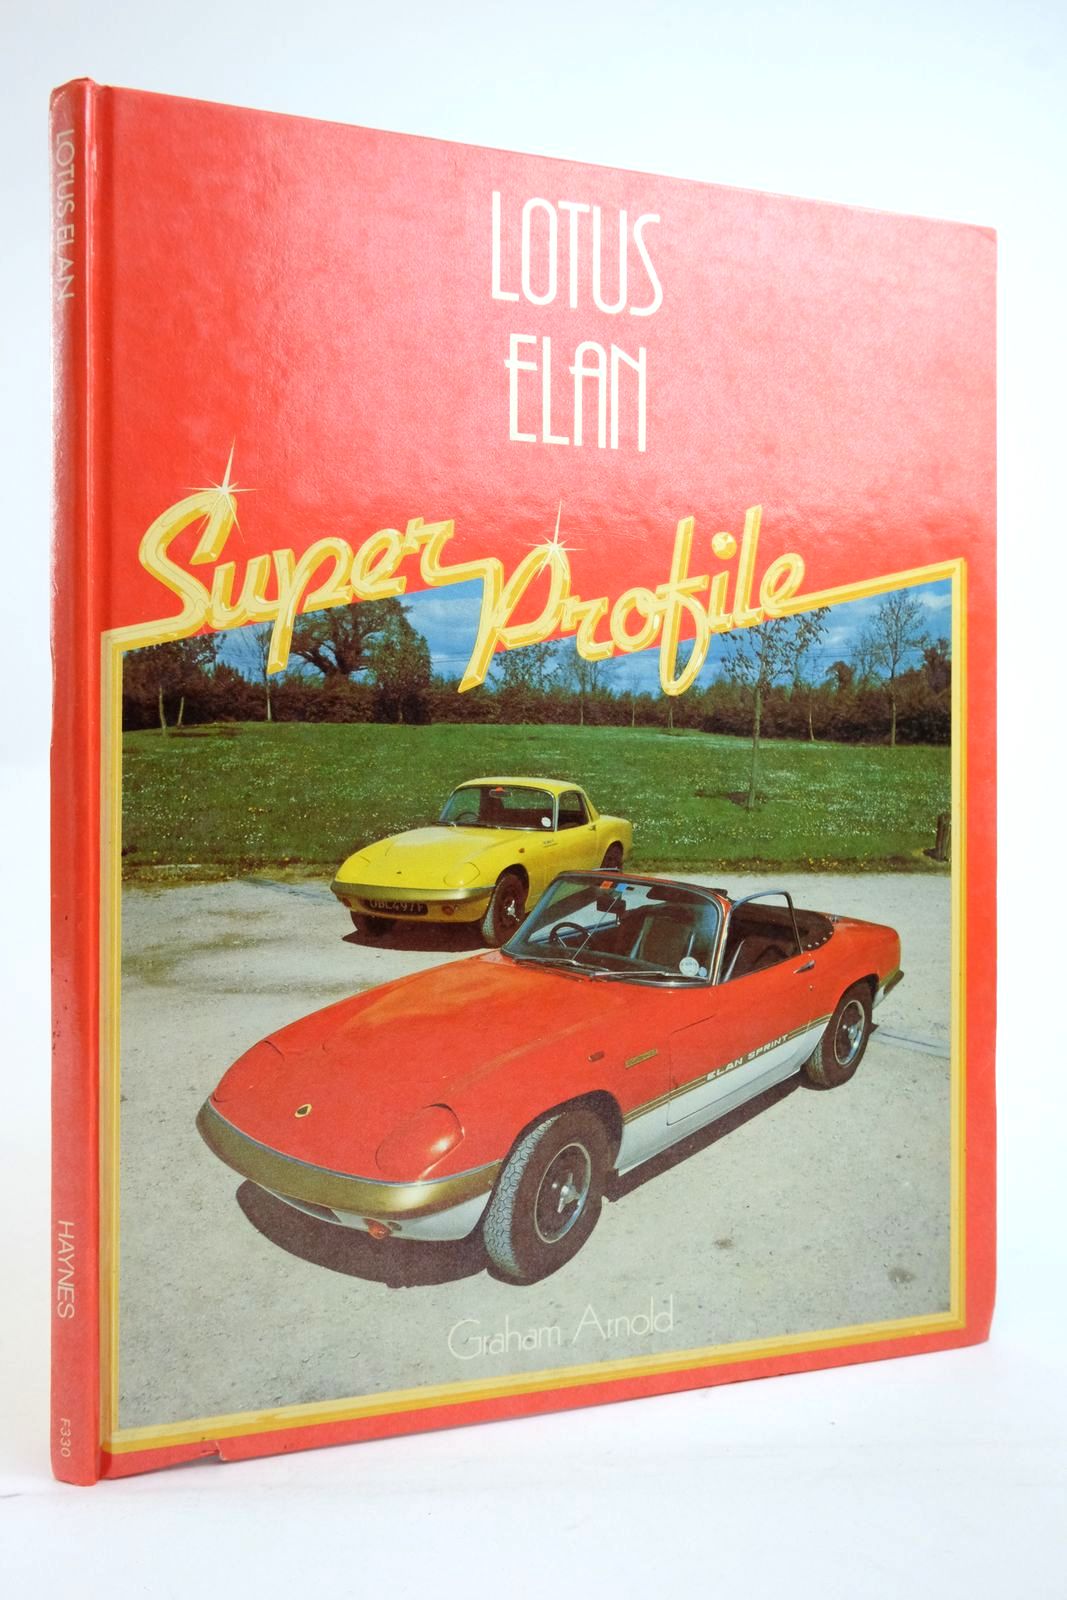 Photo of LOTUS ELAN written by Arnold, Graham published by Haynes, Foulis (STOCK CODE: 2136339)  for sale by Stella & Rose's Books